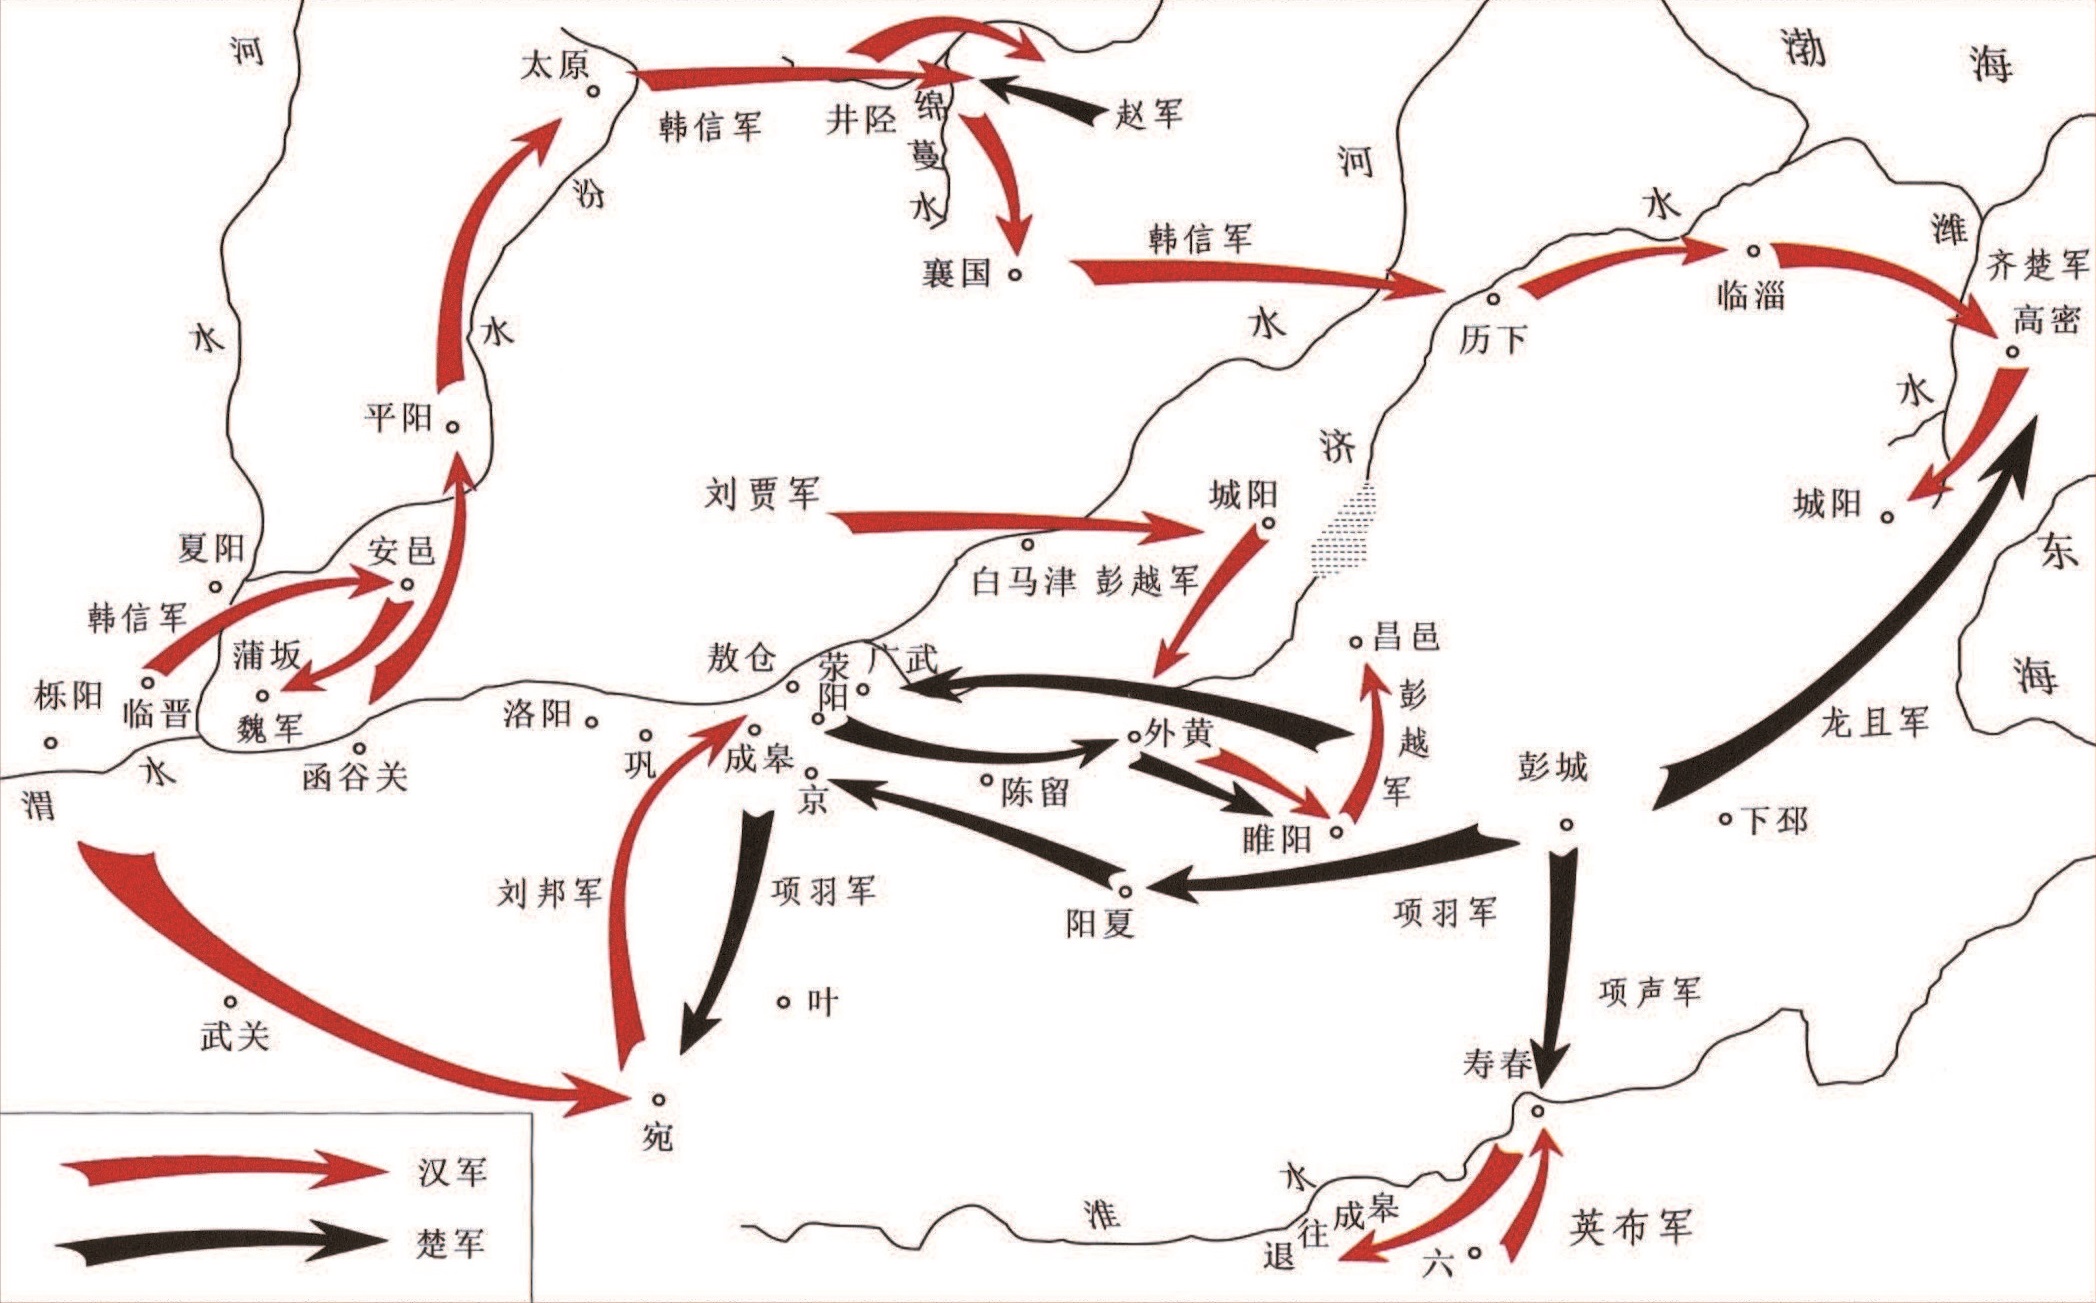 Schematic diagram of the Han army's exit and attack in the Chu-Han War (205 BC)